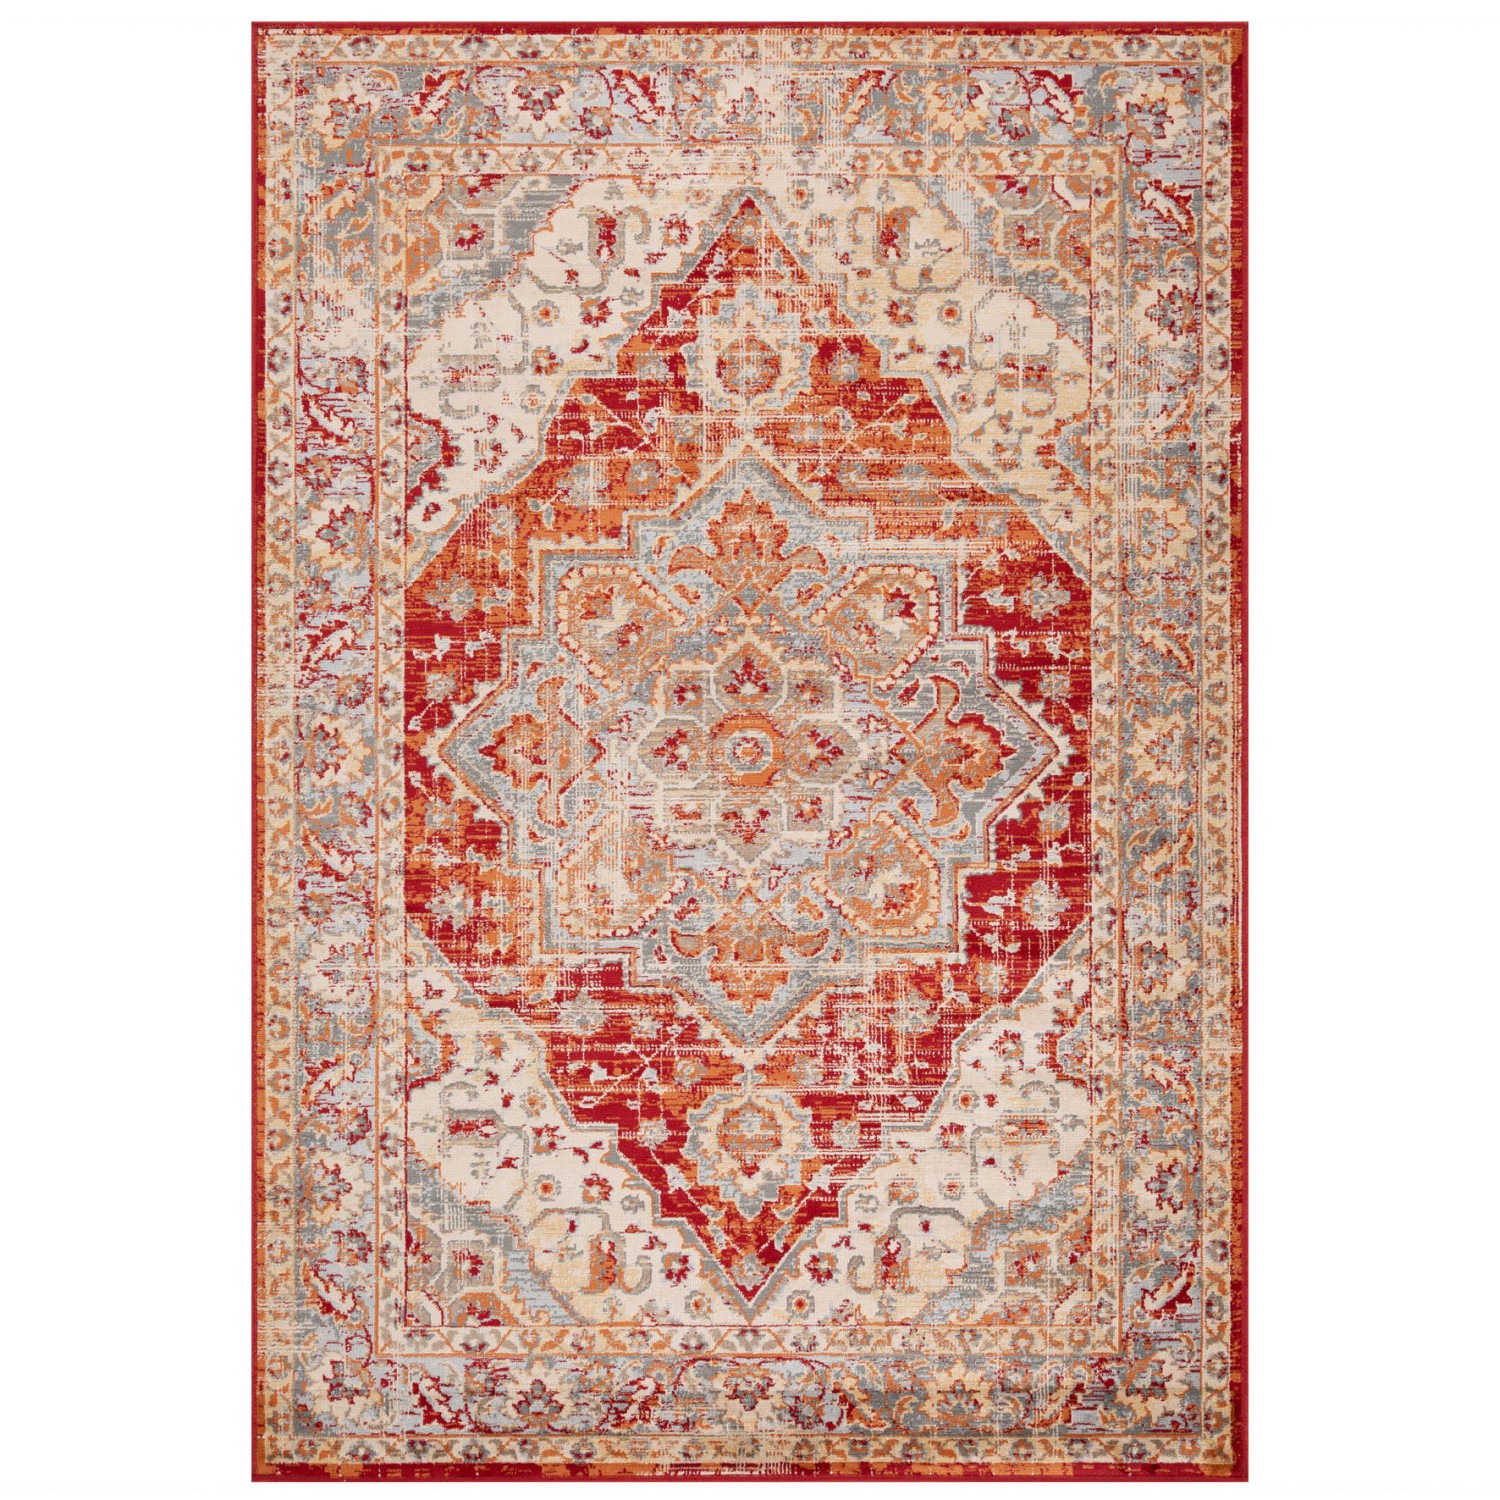 Valeria Traditional Rug - 1803R Red